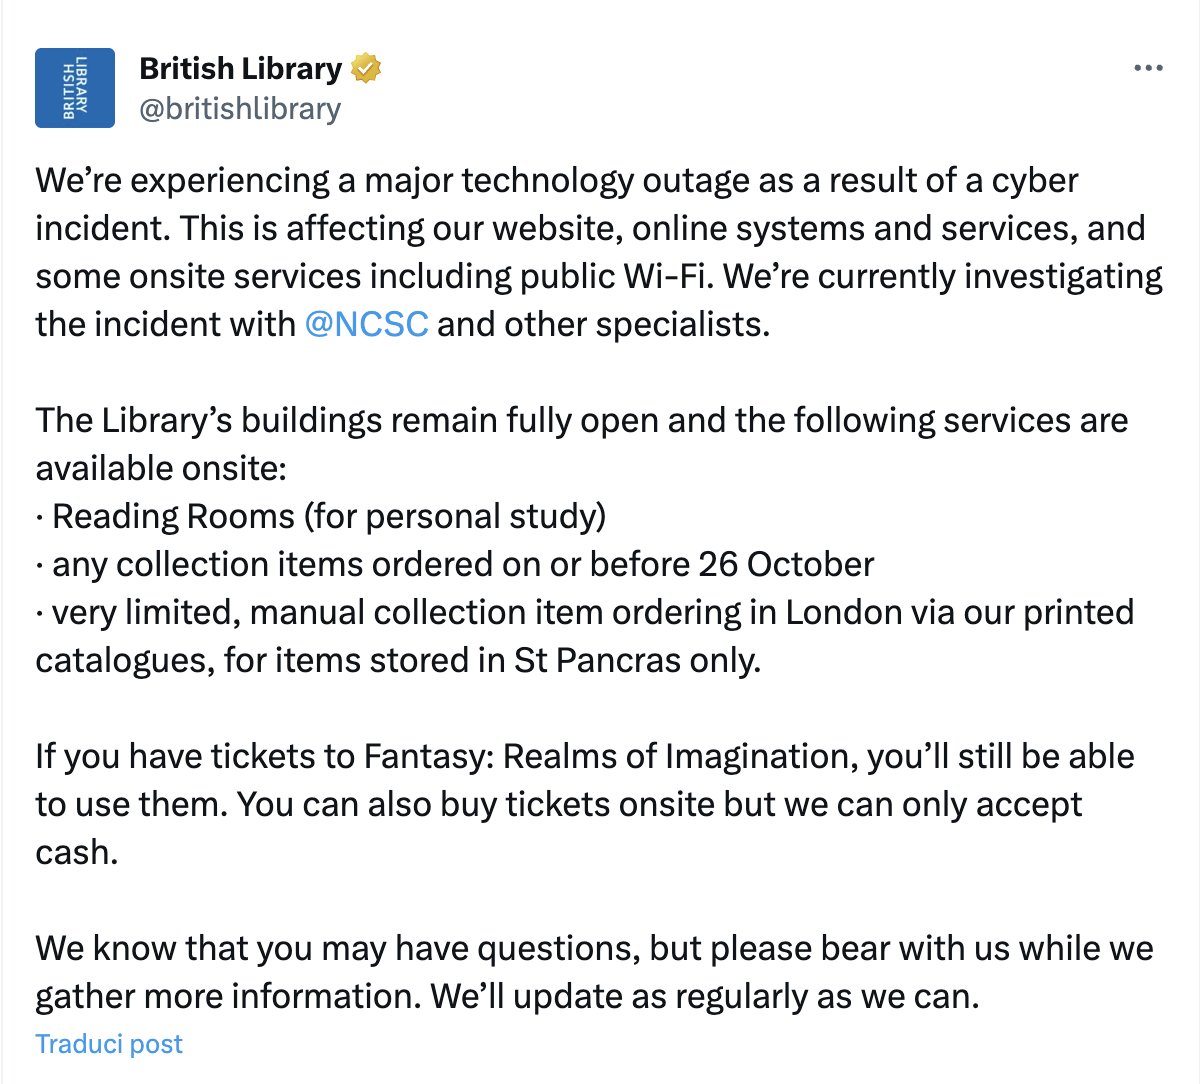 British Library suffers major outage due to cyberattack